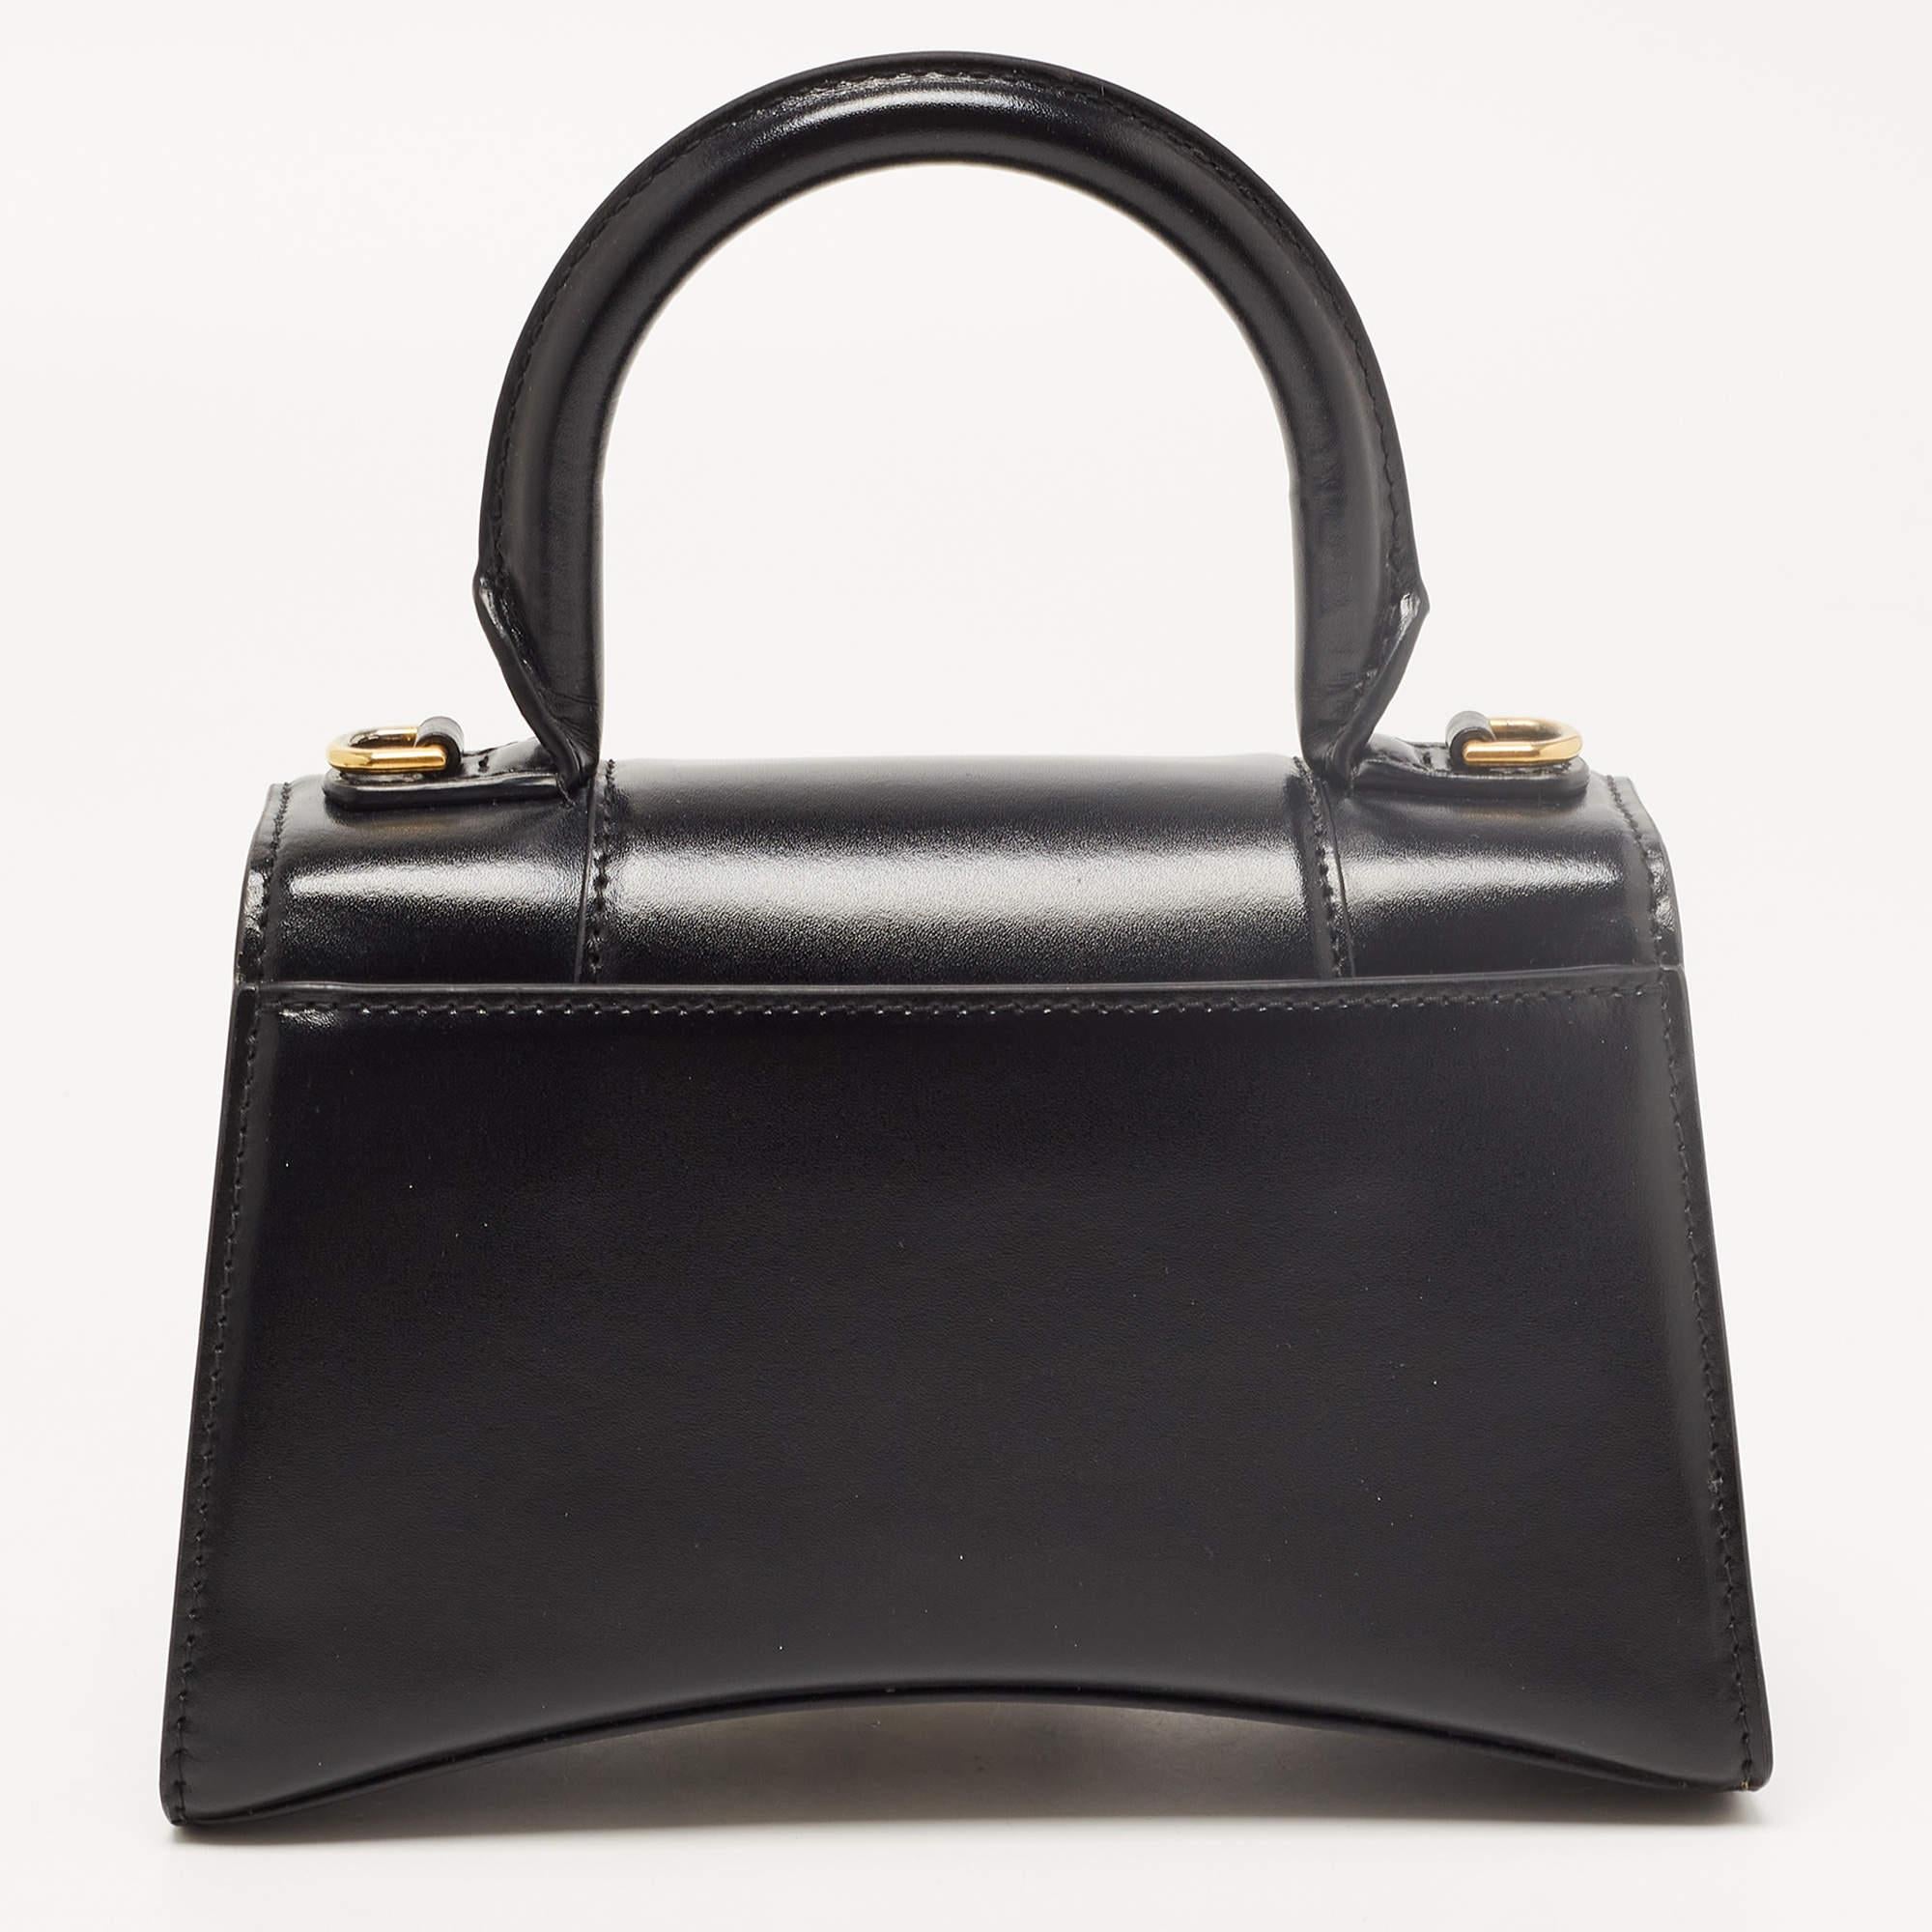 Balenciaga's Hourglass bag is a must-have bag. Crafted using black leather, the Hourglass top handle bag is styled with a flap that has the iconic B logo. The bag has a lined interior, a shapely top handle, and a shoulder strap.

Includes: Original